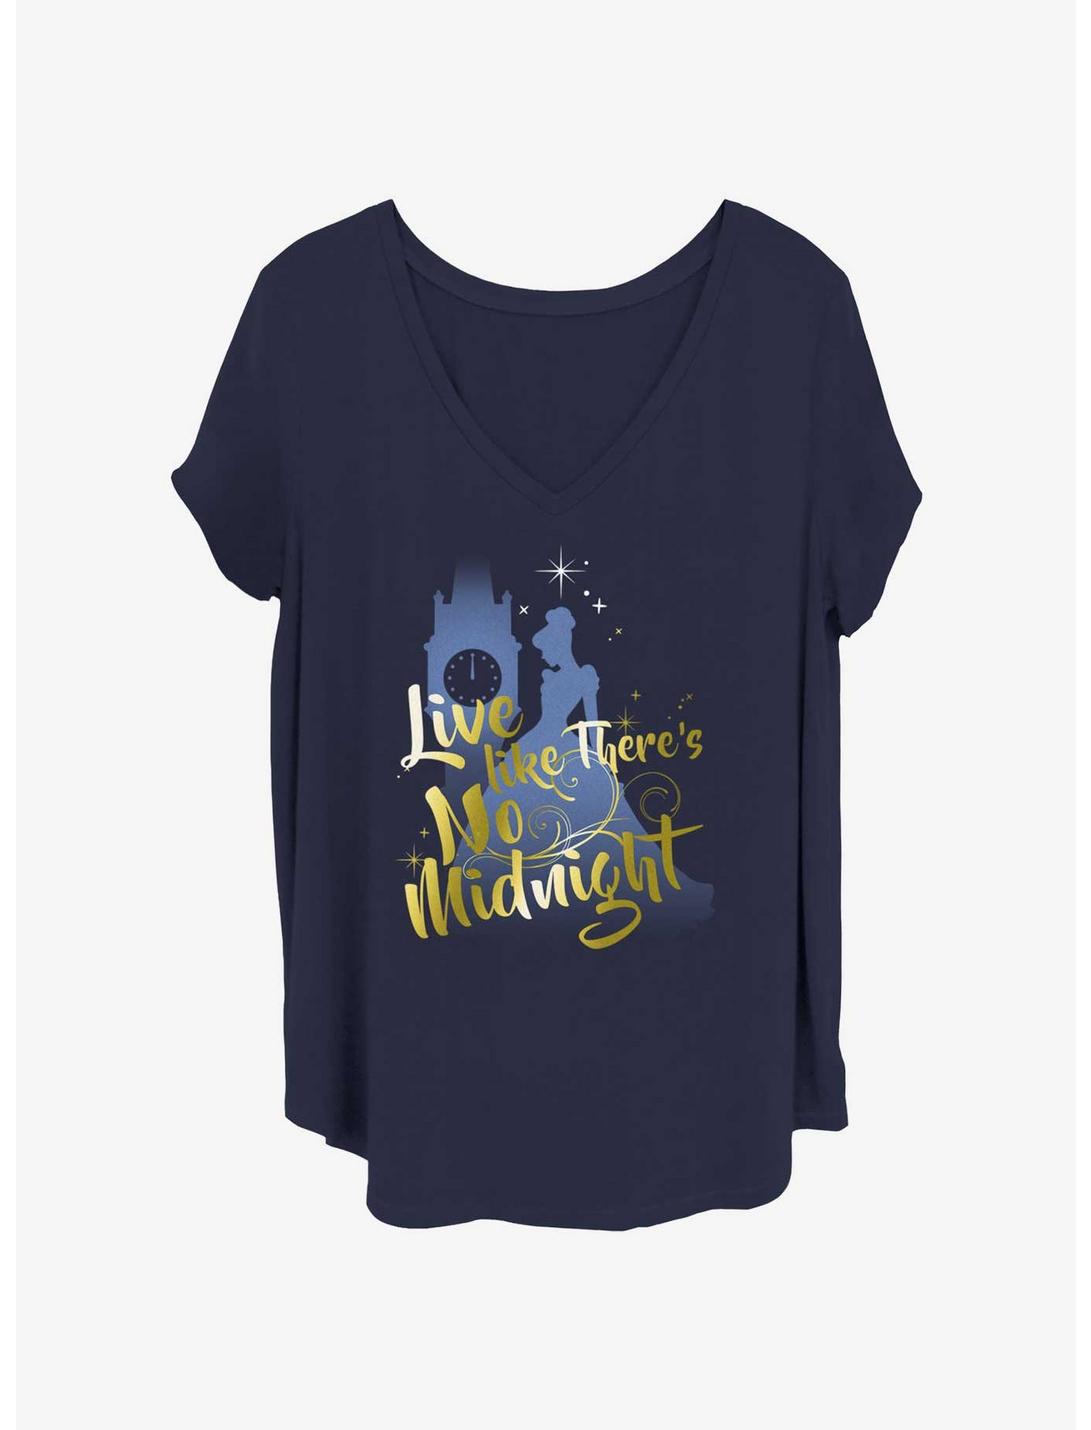 Disney Cinderella Live Like There's No Midnight Womens T-Shirt Plus Size, NAVY, hi-res